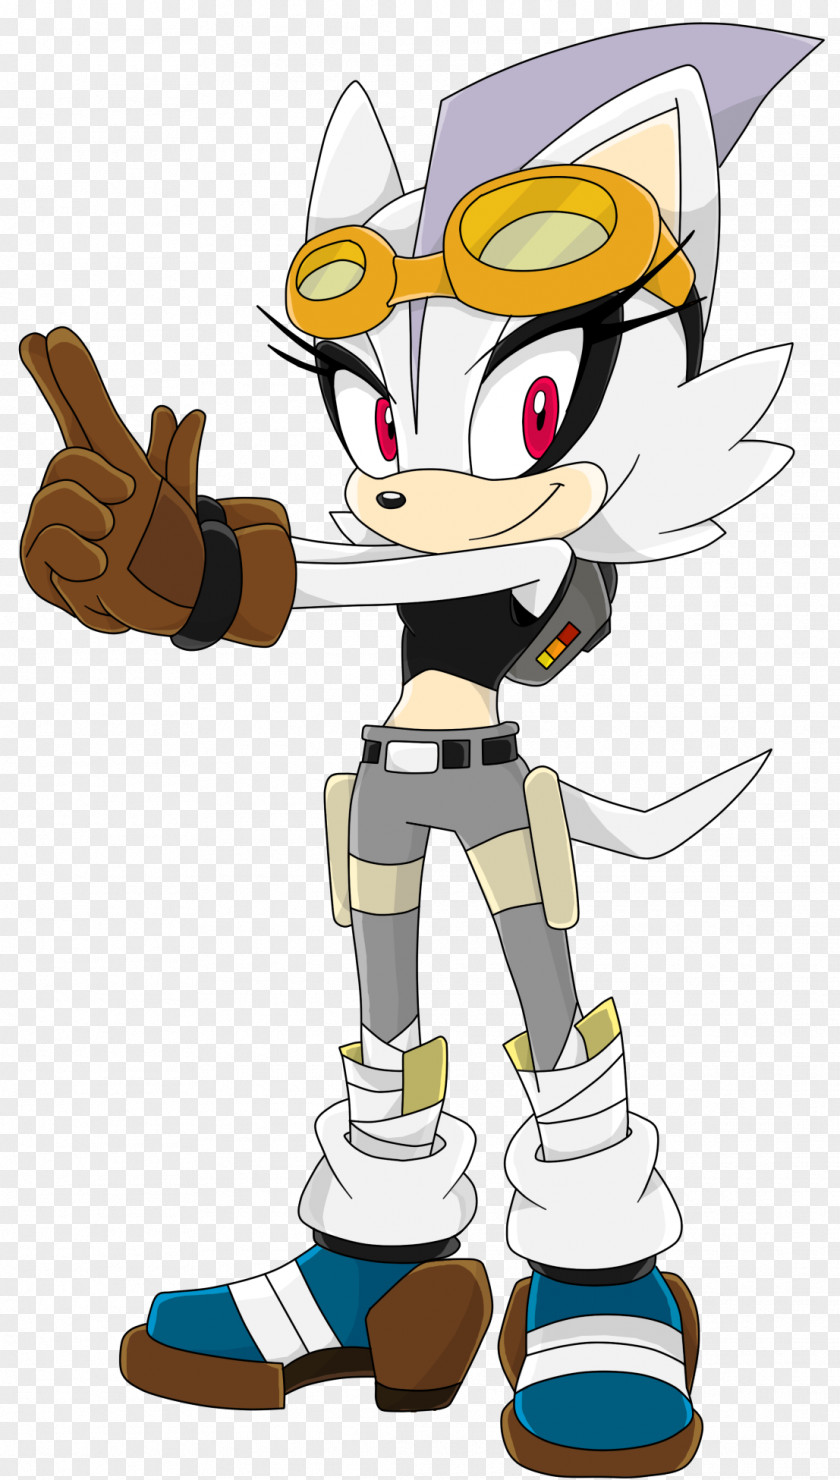 Sonic The Hedgehog Knuckles Echidna And Black Knight Colors Mania PNG